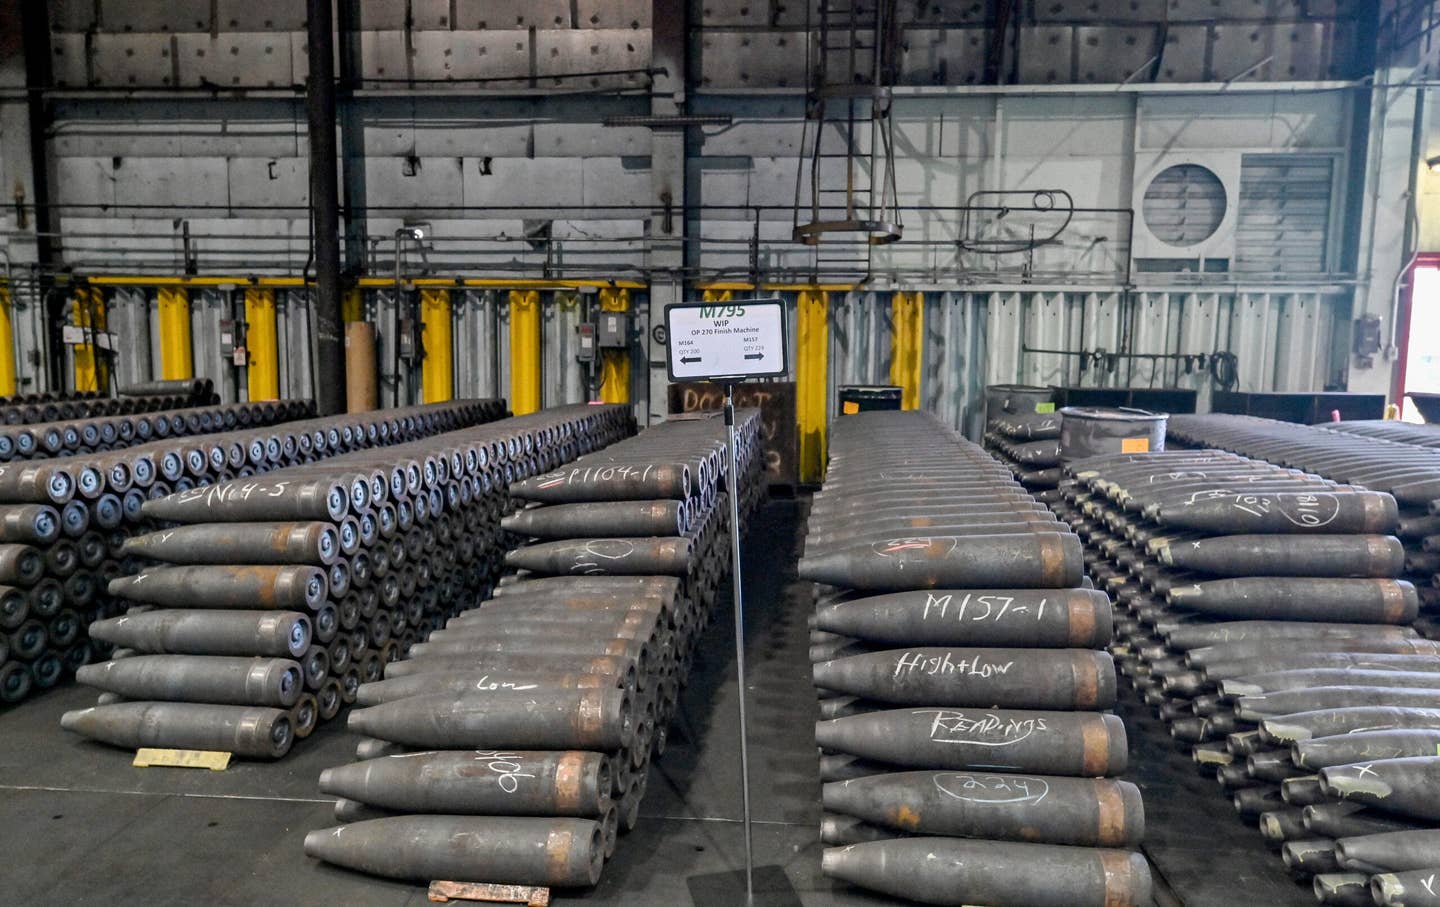 Rows of incomplete 155mm shells wait for the next step in production at the Scranton Army Ammunition Plant. (Photo by Aimee Dilger/SOPA Images/LightRocket via Getty Images)